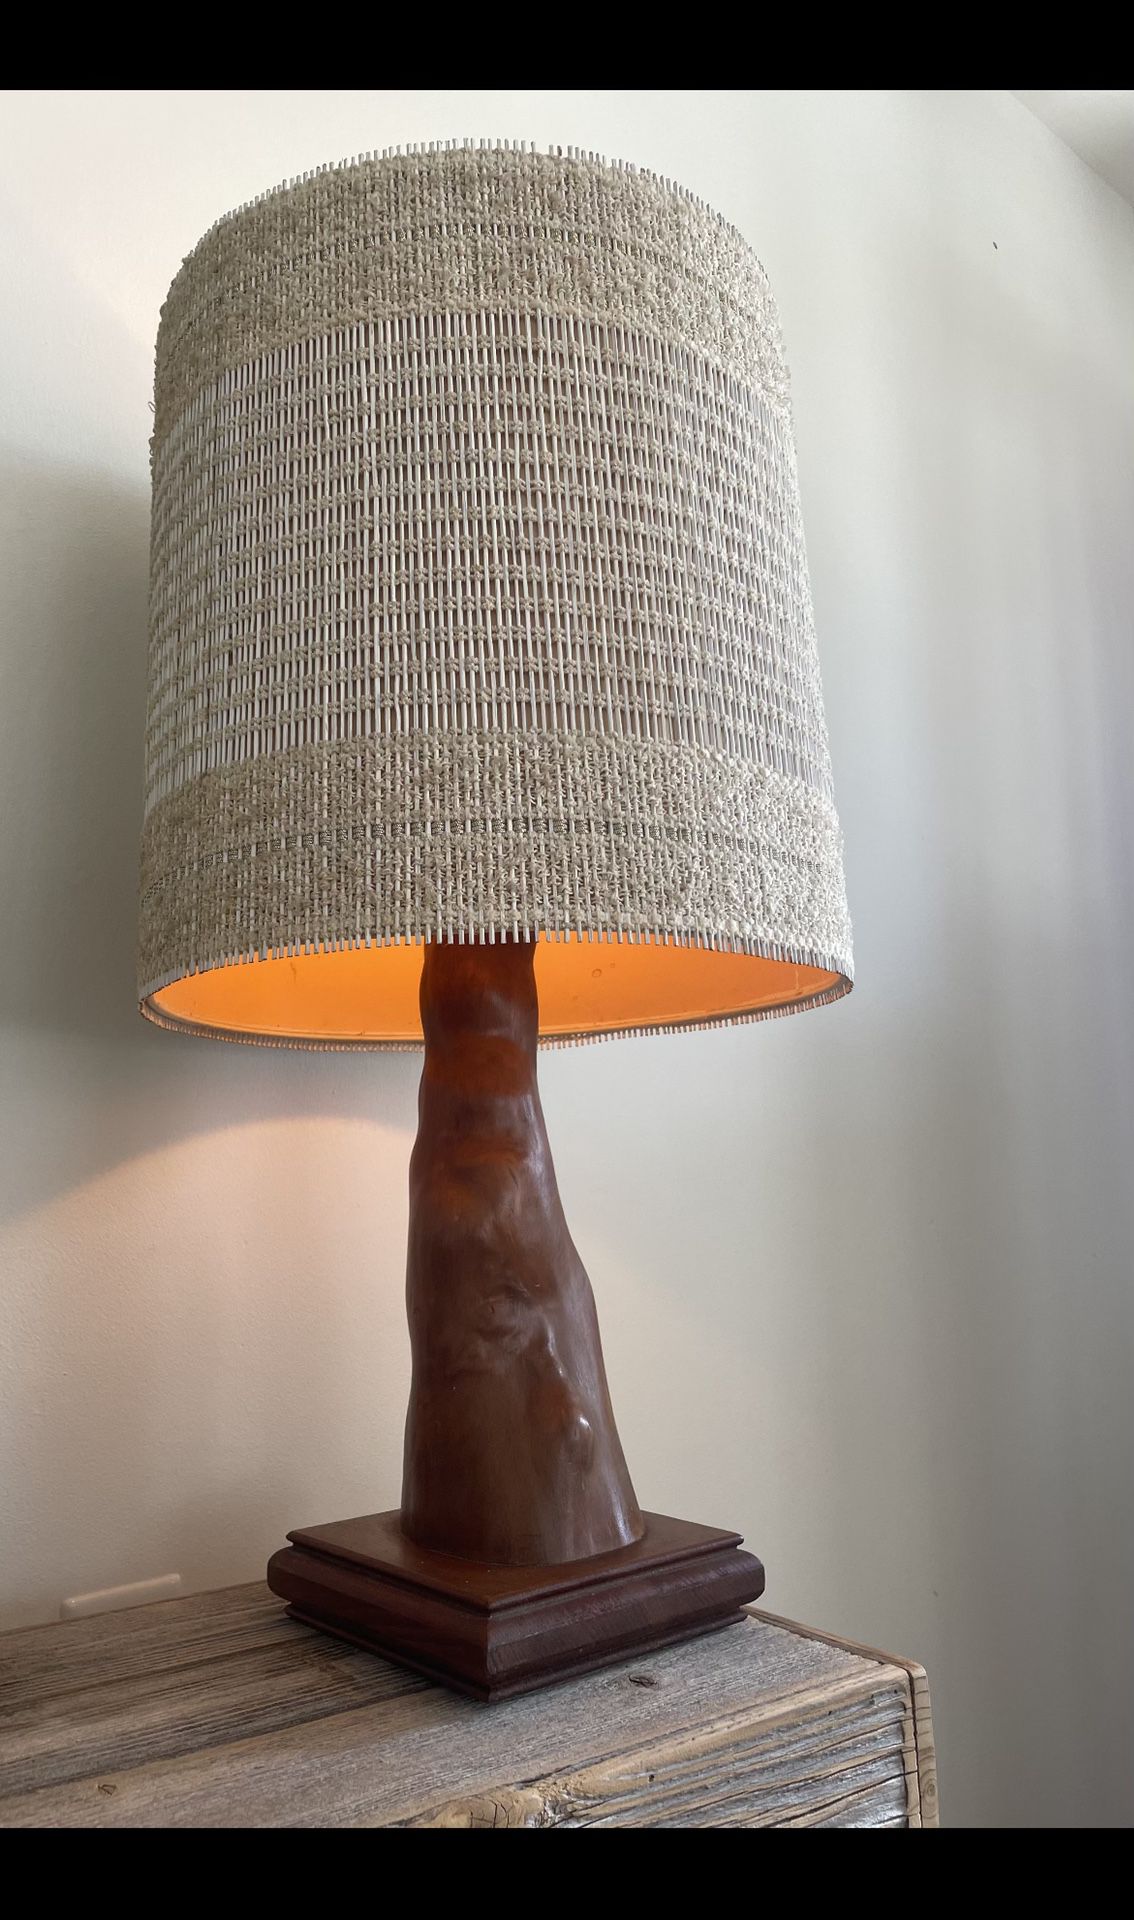 Mid Century Lamp From 1960’s With Very Clean Lamp Shade